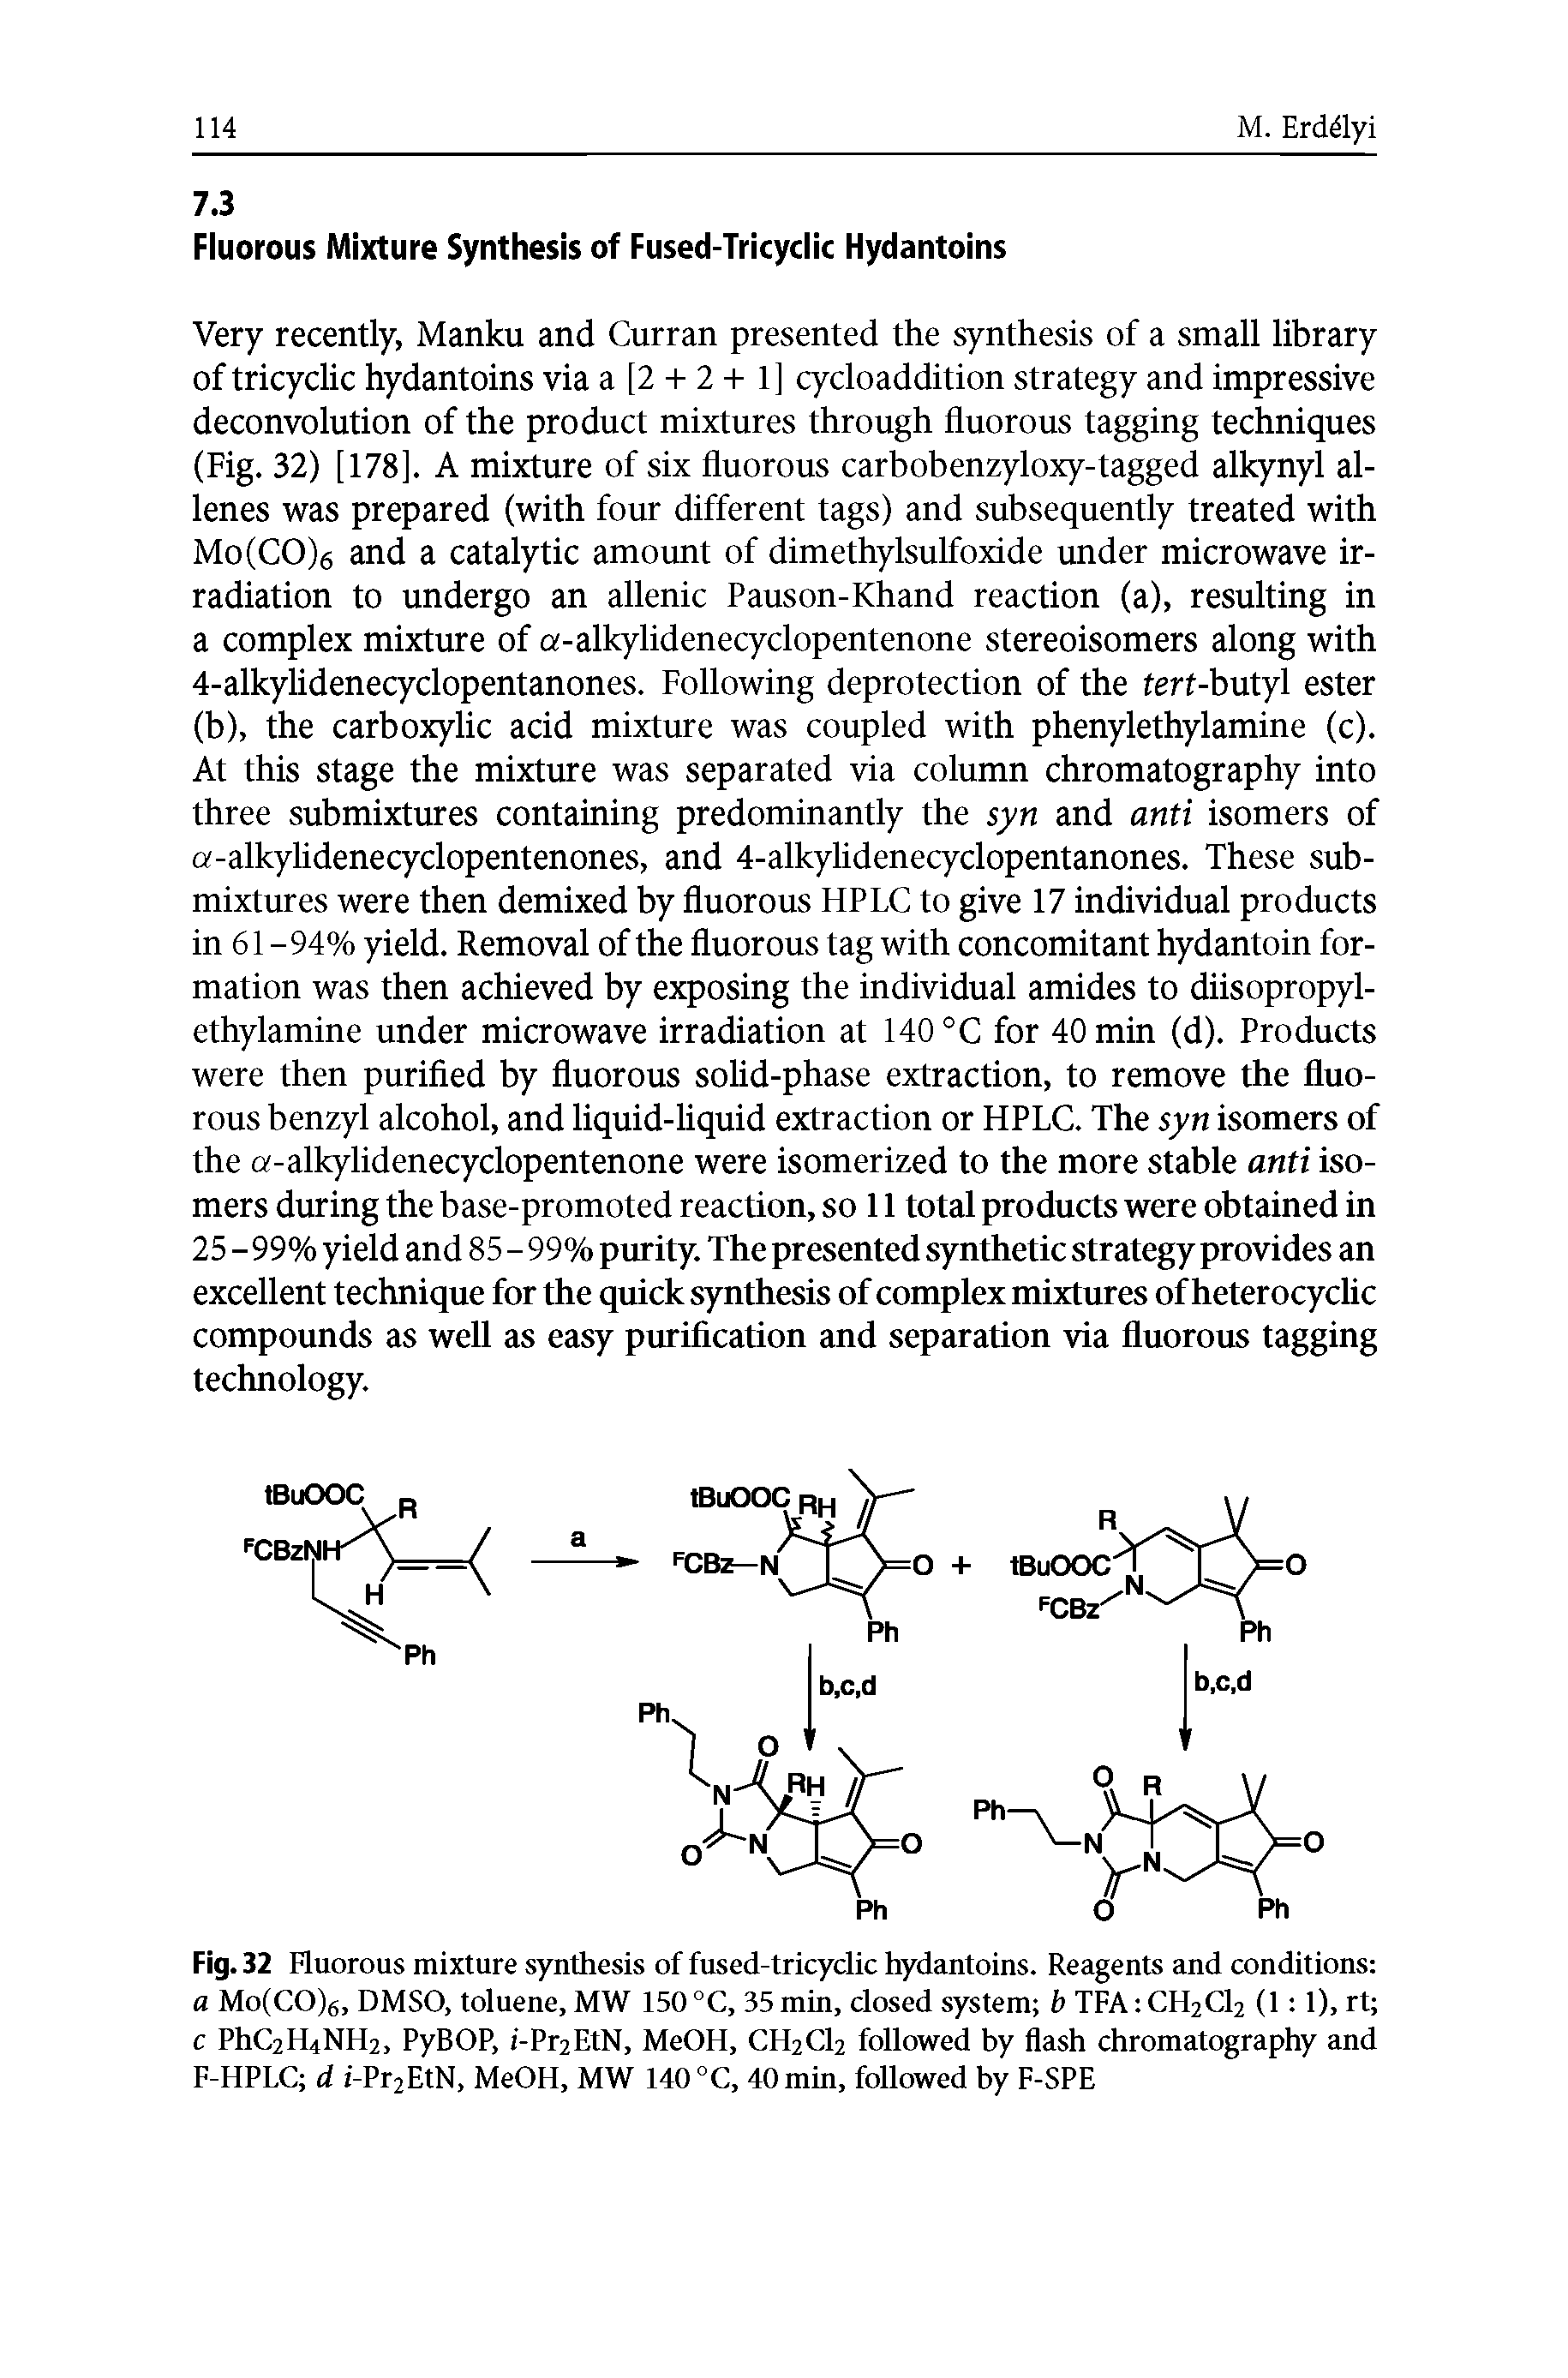 Fig. 32 Fluorous mixture synthesis of fused-tricyclic hydantoins. Reagents and conditions a Mo(CO)6, DMSO, toluene, MW 150 °C, 35 min, closed system b TFA CH2CI2 (1 1), rt c PhC2H4NH2, PyBOP, i-Pr2EtN, MeOH, CH2CI2 followed by flash chromatography and F-HPLC d i-Pr2EtN, MeOH, MW 140 °C, 40 min, followed by F-SPE...